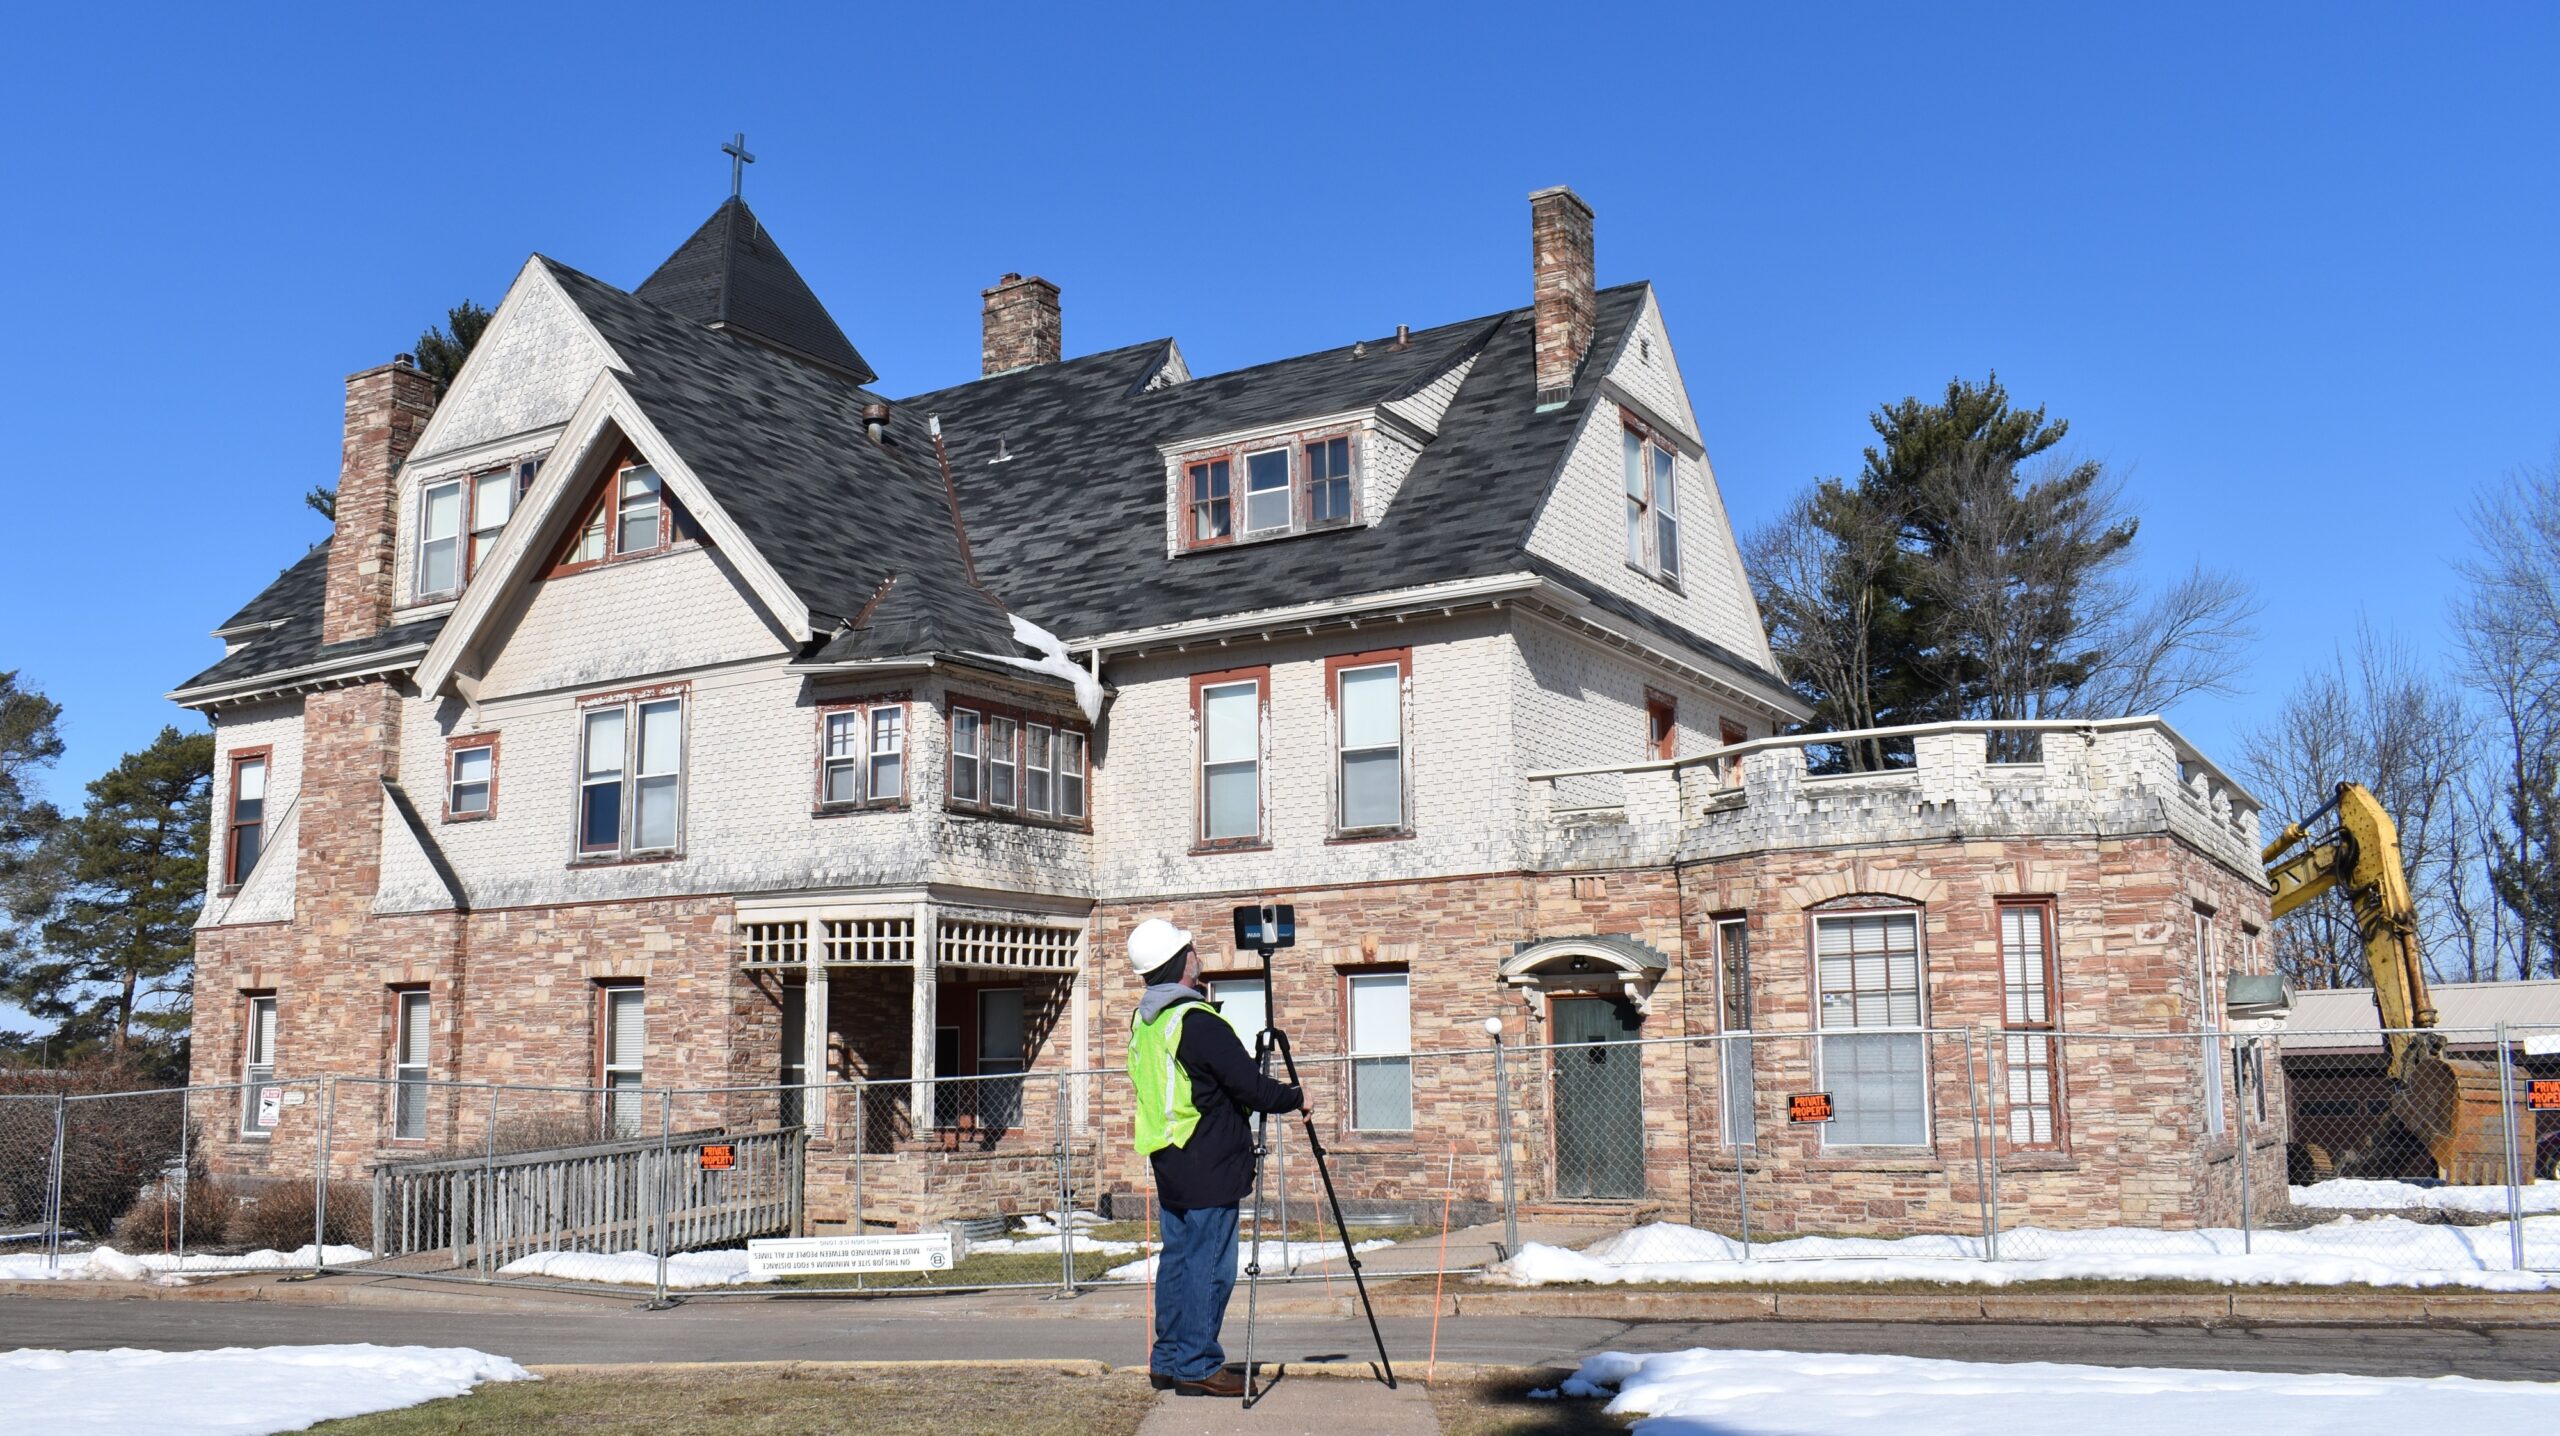 3D Scans Will Allow Historic Building Slated For Demolition To Be Rebuilt In Virtual Reality